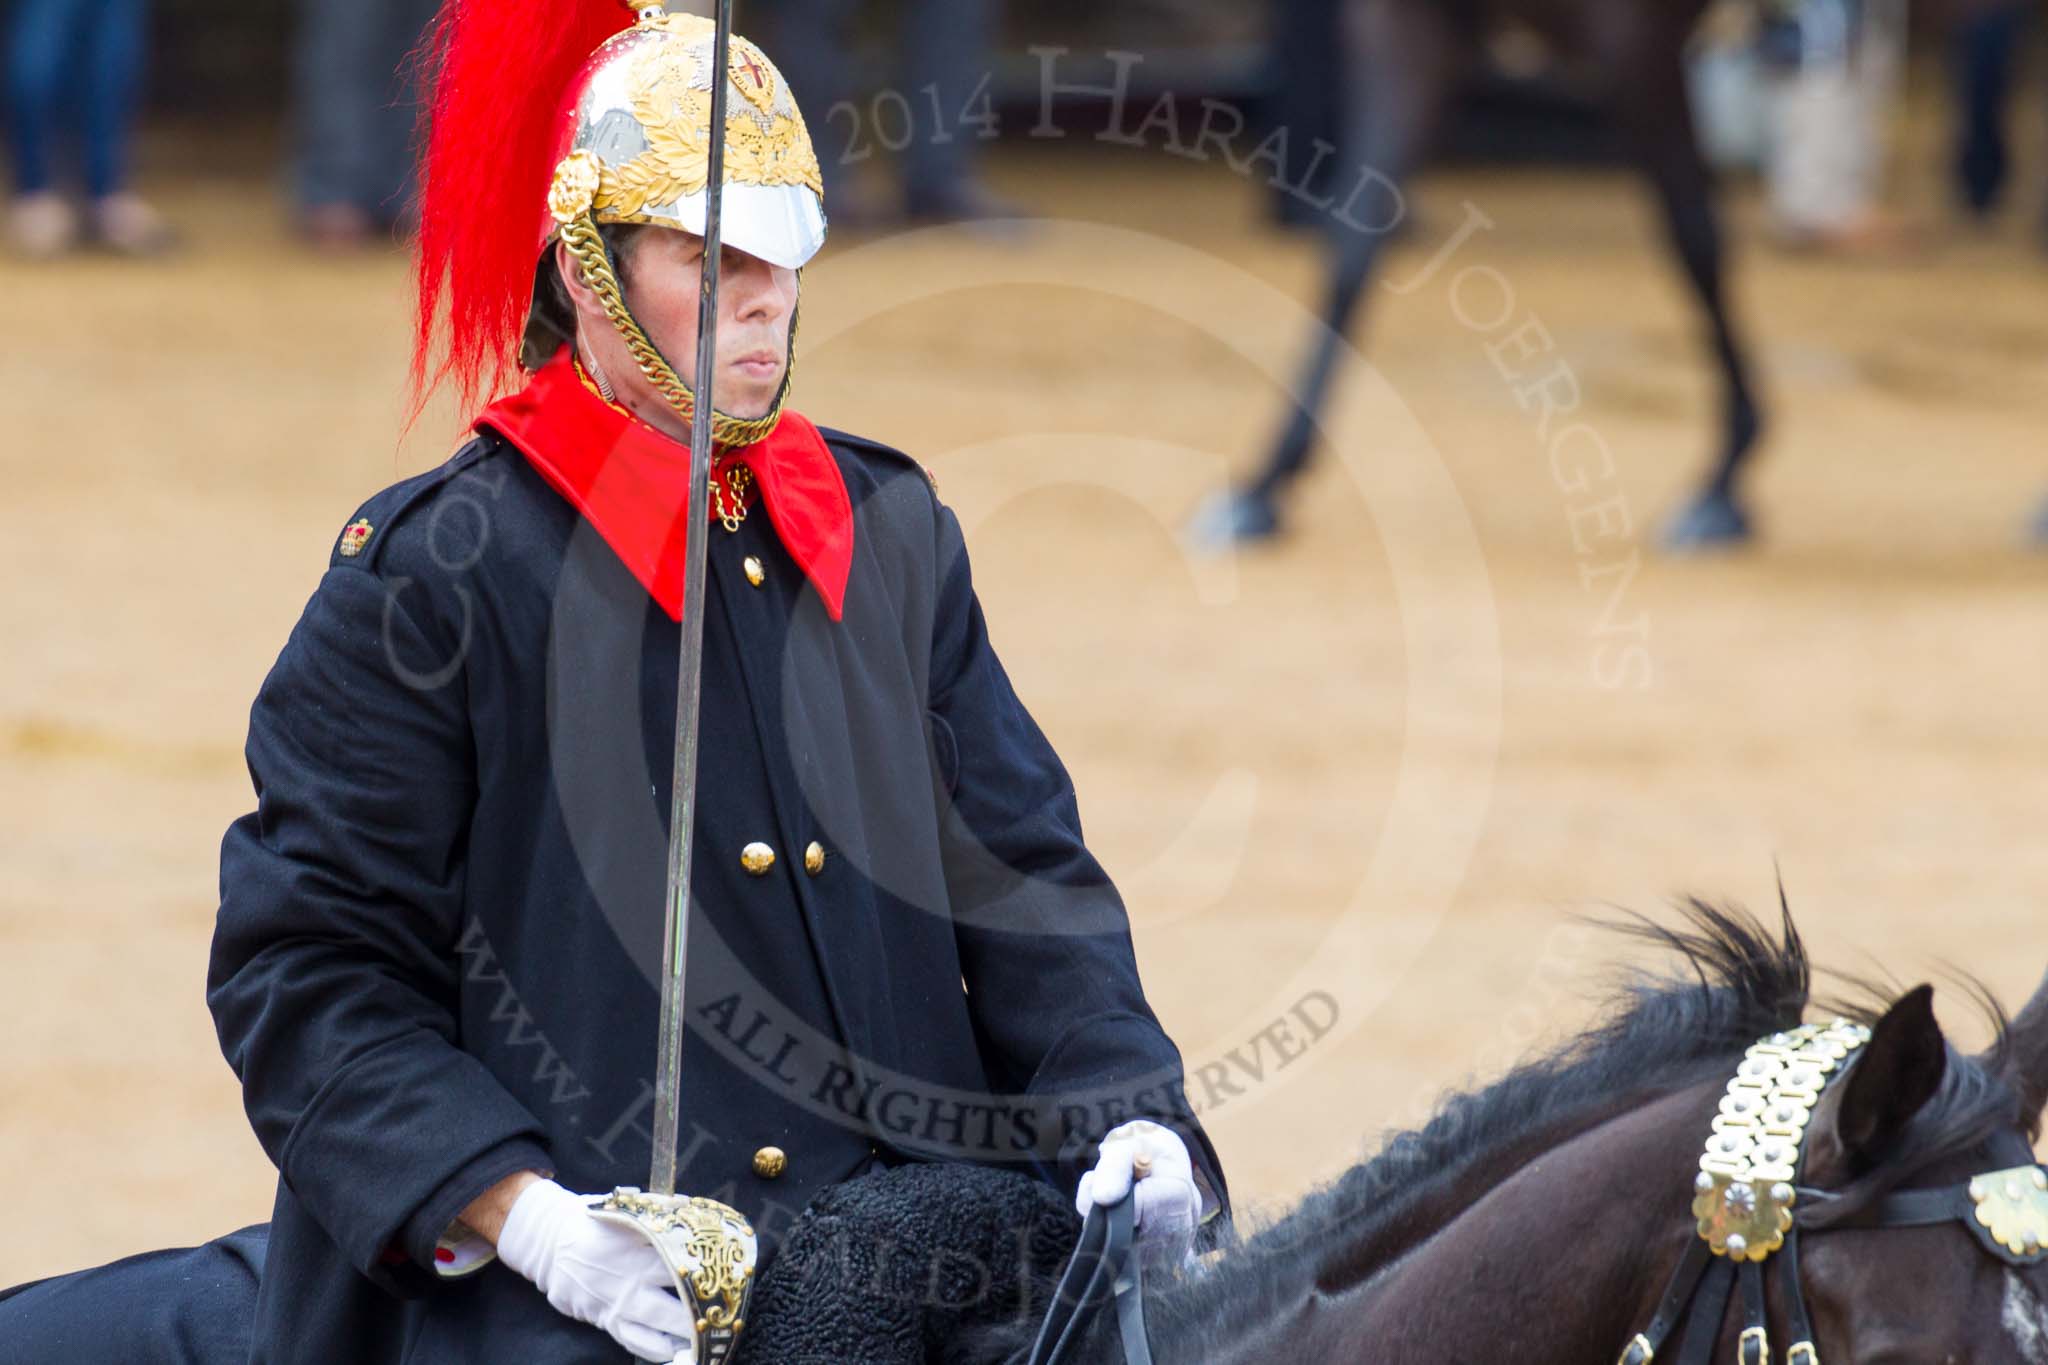 The Colonel's Review 2014.
Horse Guards Parade, Westminster,
London,

United Kingdom,
on 07 June 2014 at 11:54, image #621